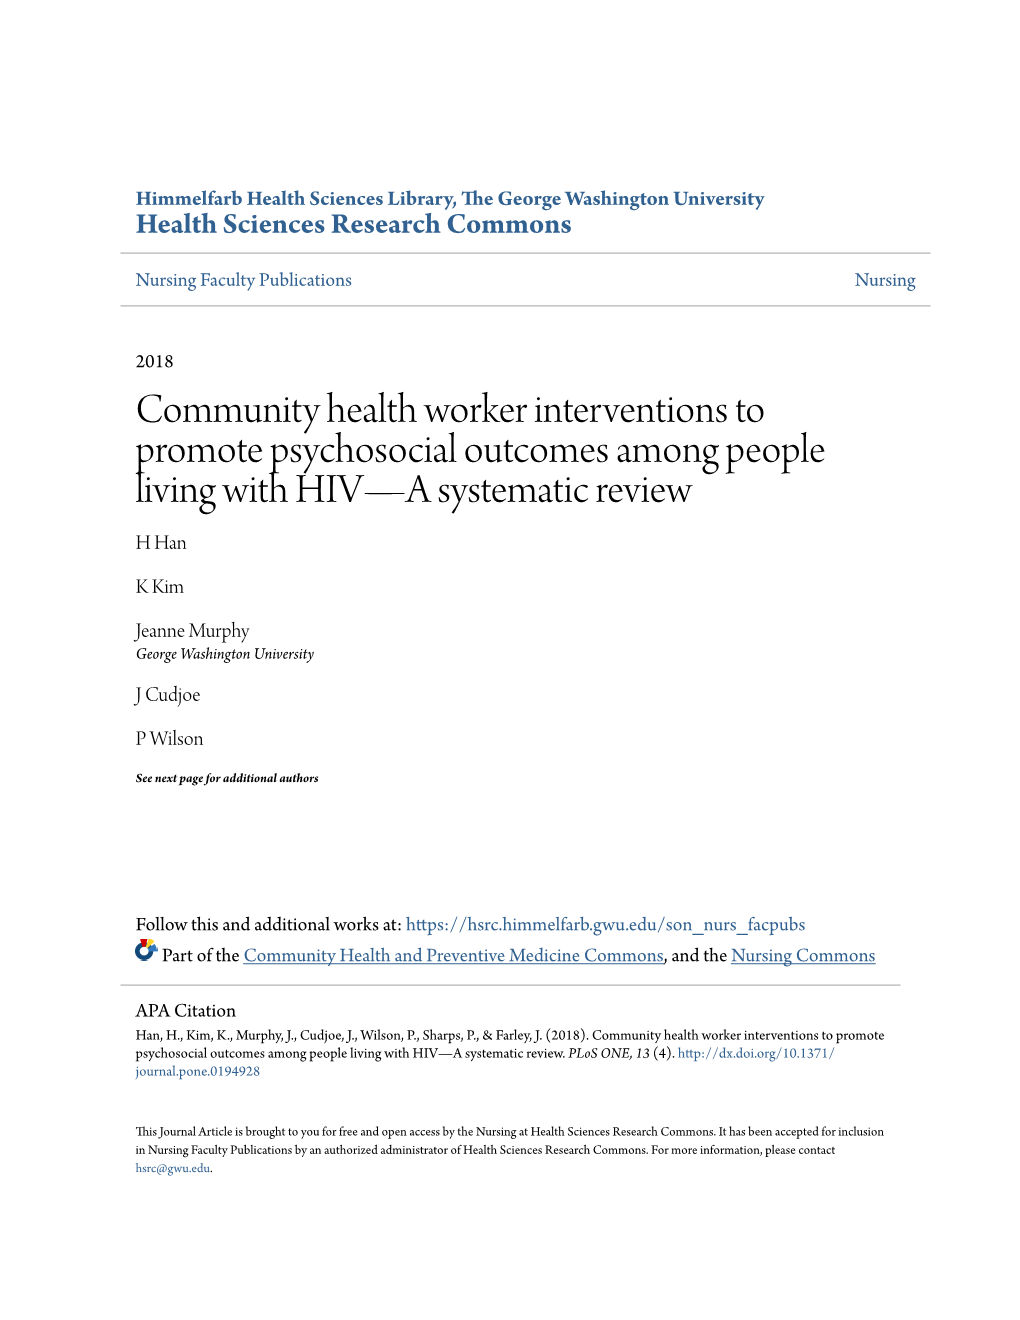 Community Health Worker Interventions to Promote Psychosocial Outcomes Among People Living with HIV—A Systematic Review H Han